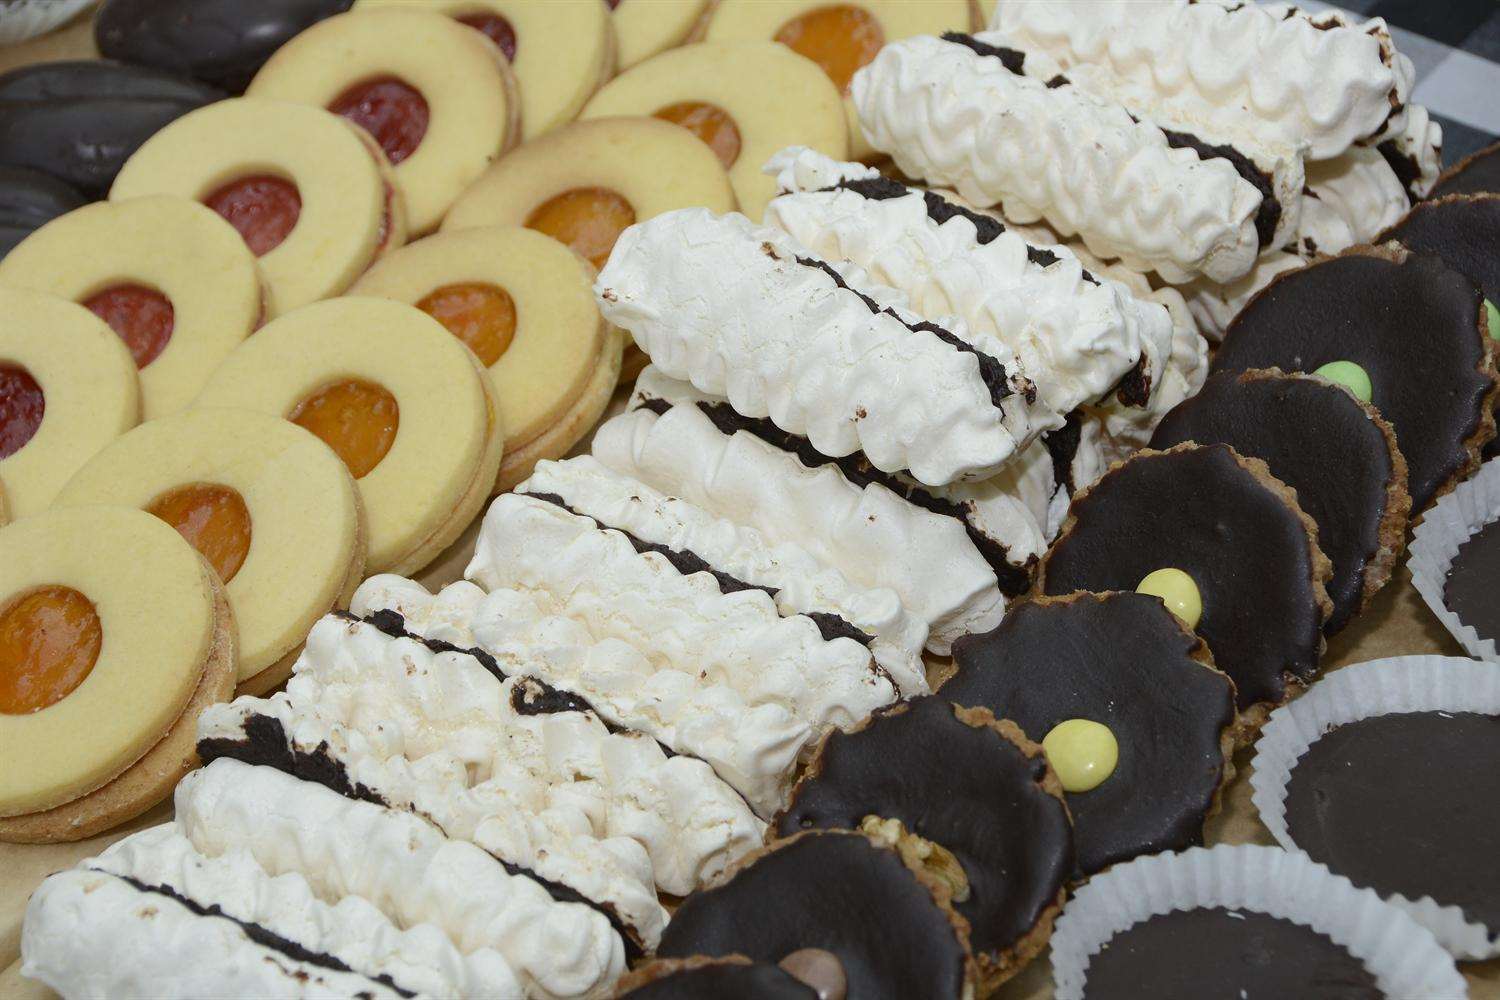 If you have a sweet tooth, there will be plenty to pick from this weekend